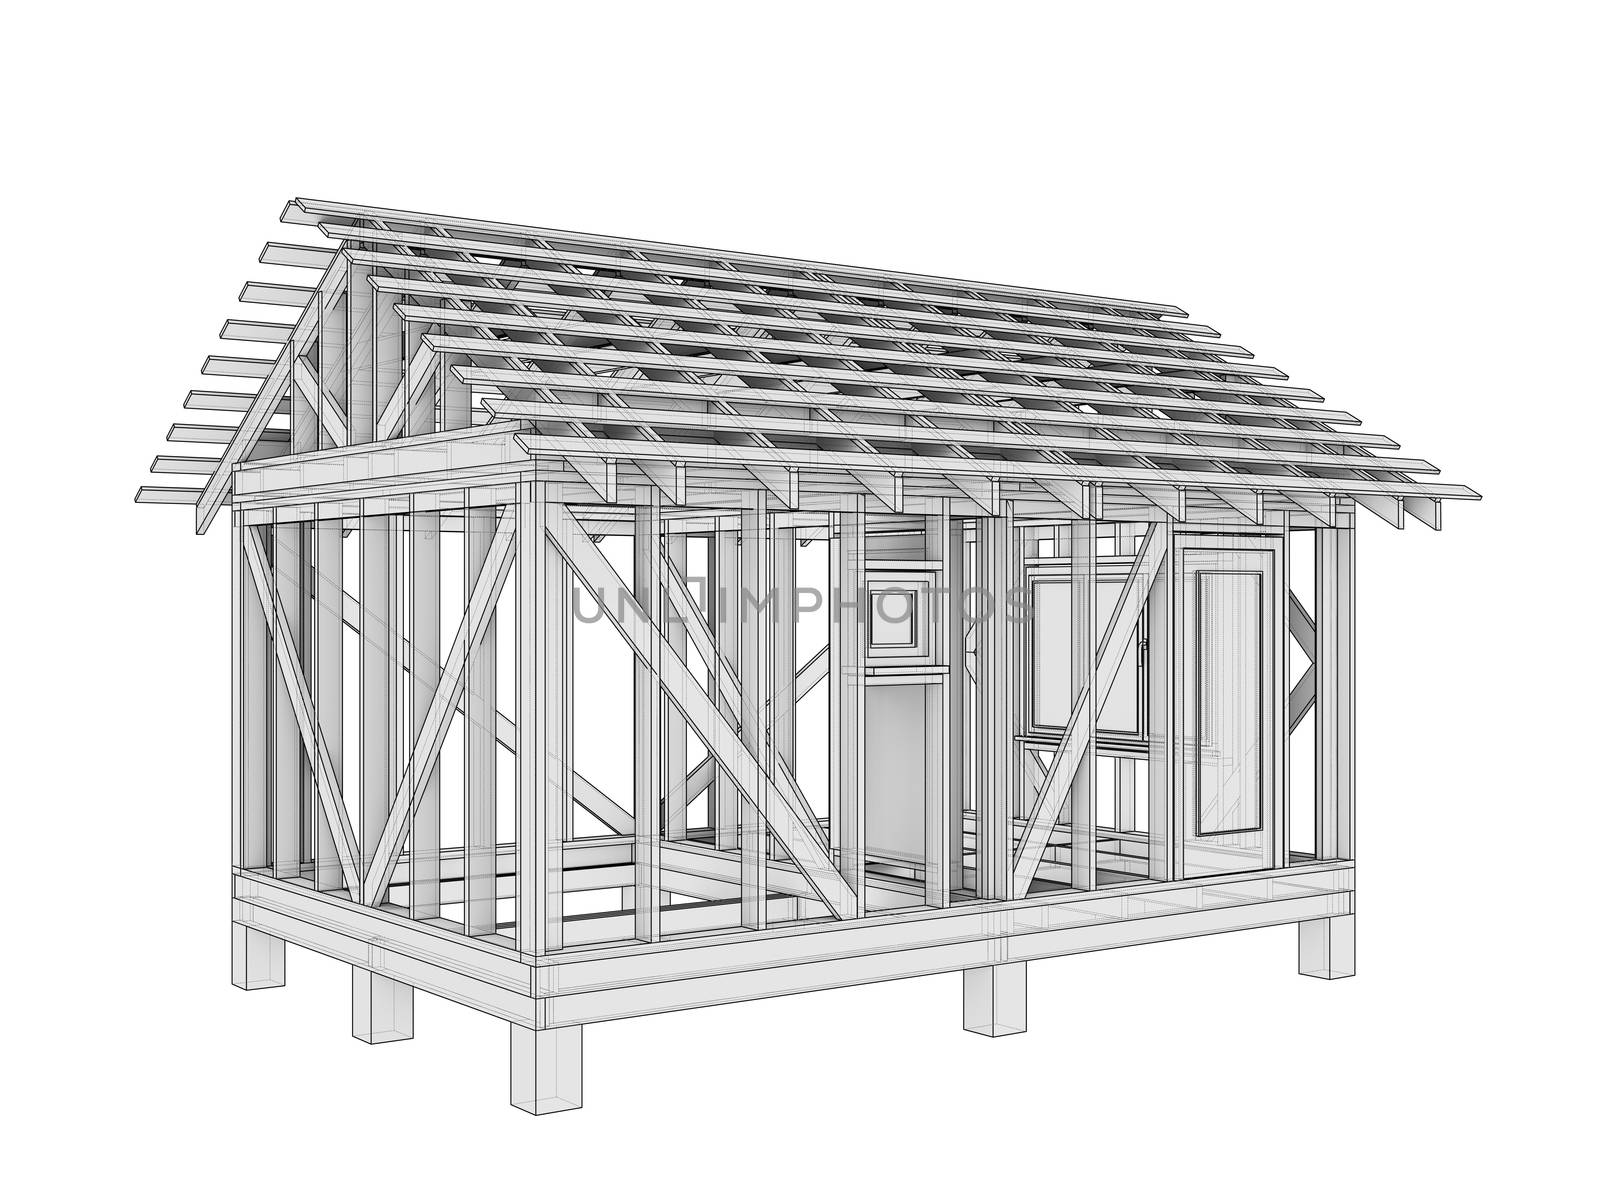 3D illustration of a small frame house by cherezoff